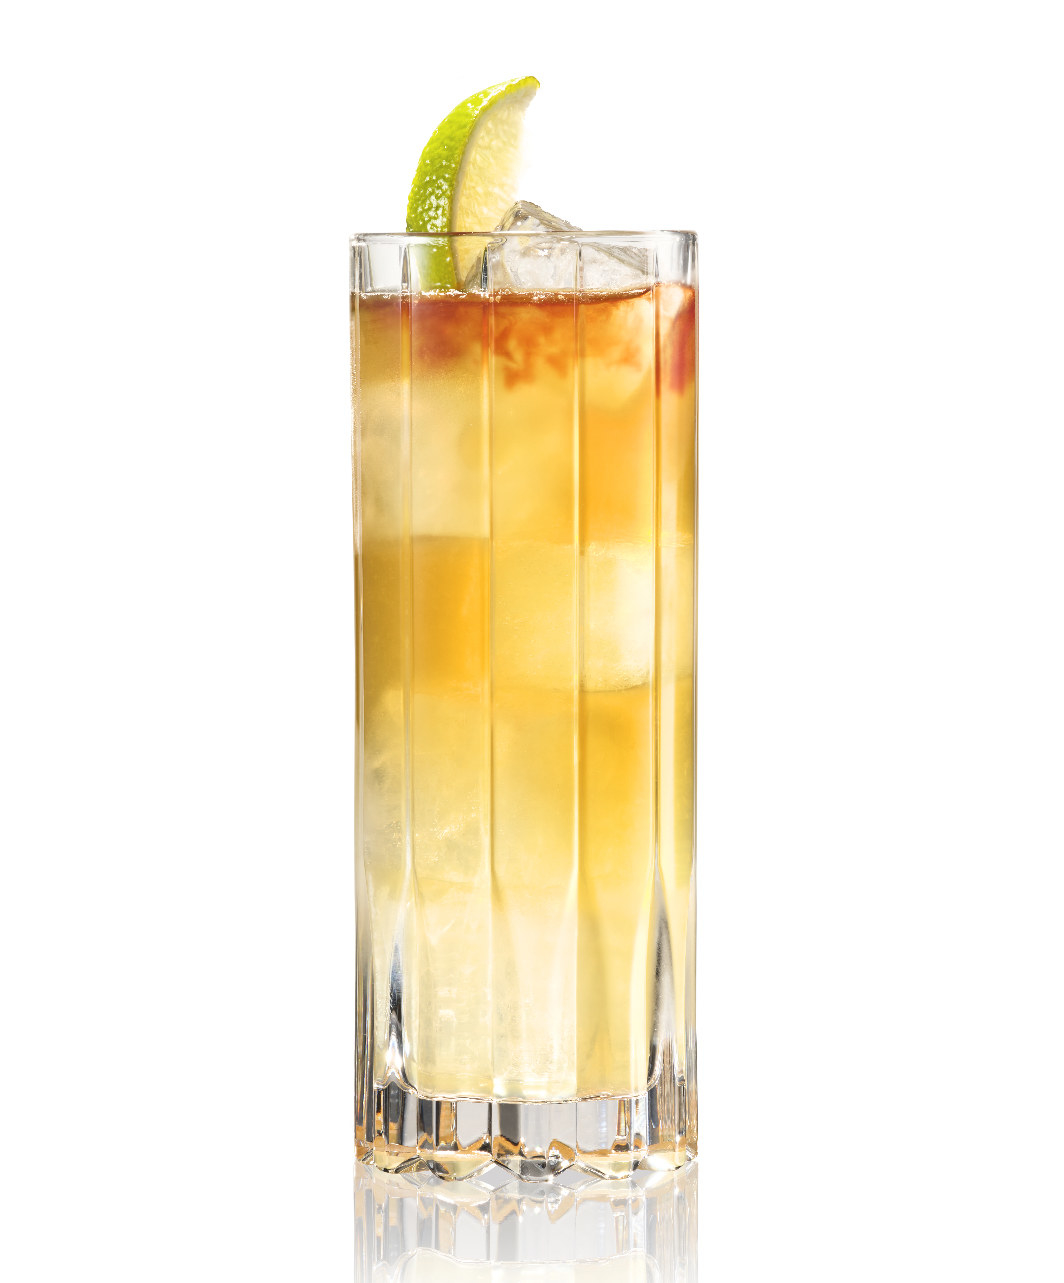 the jamaican mule made with appleton rum